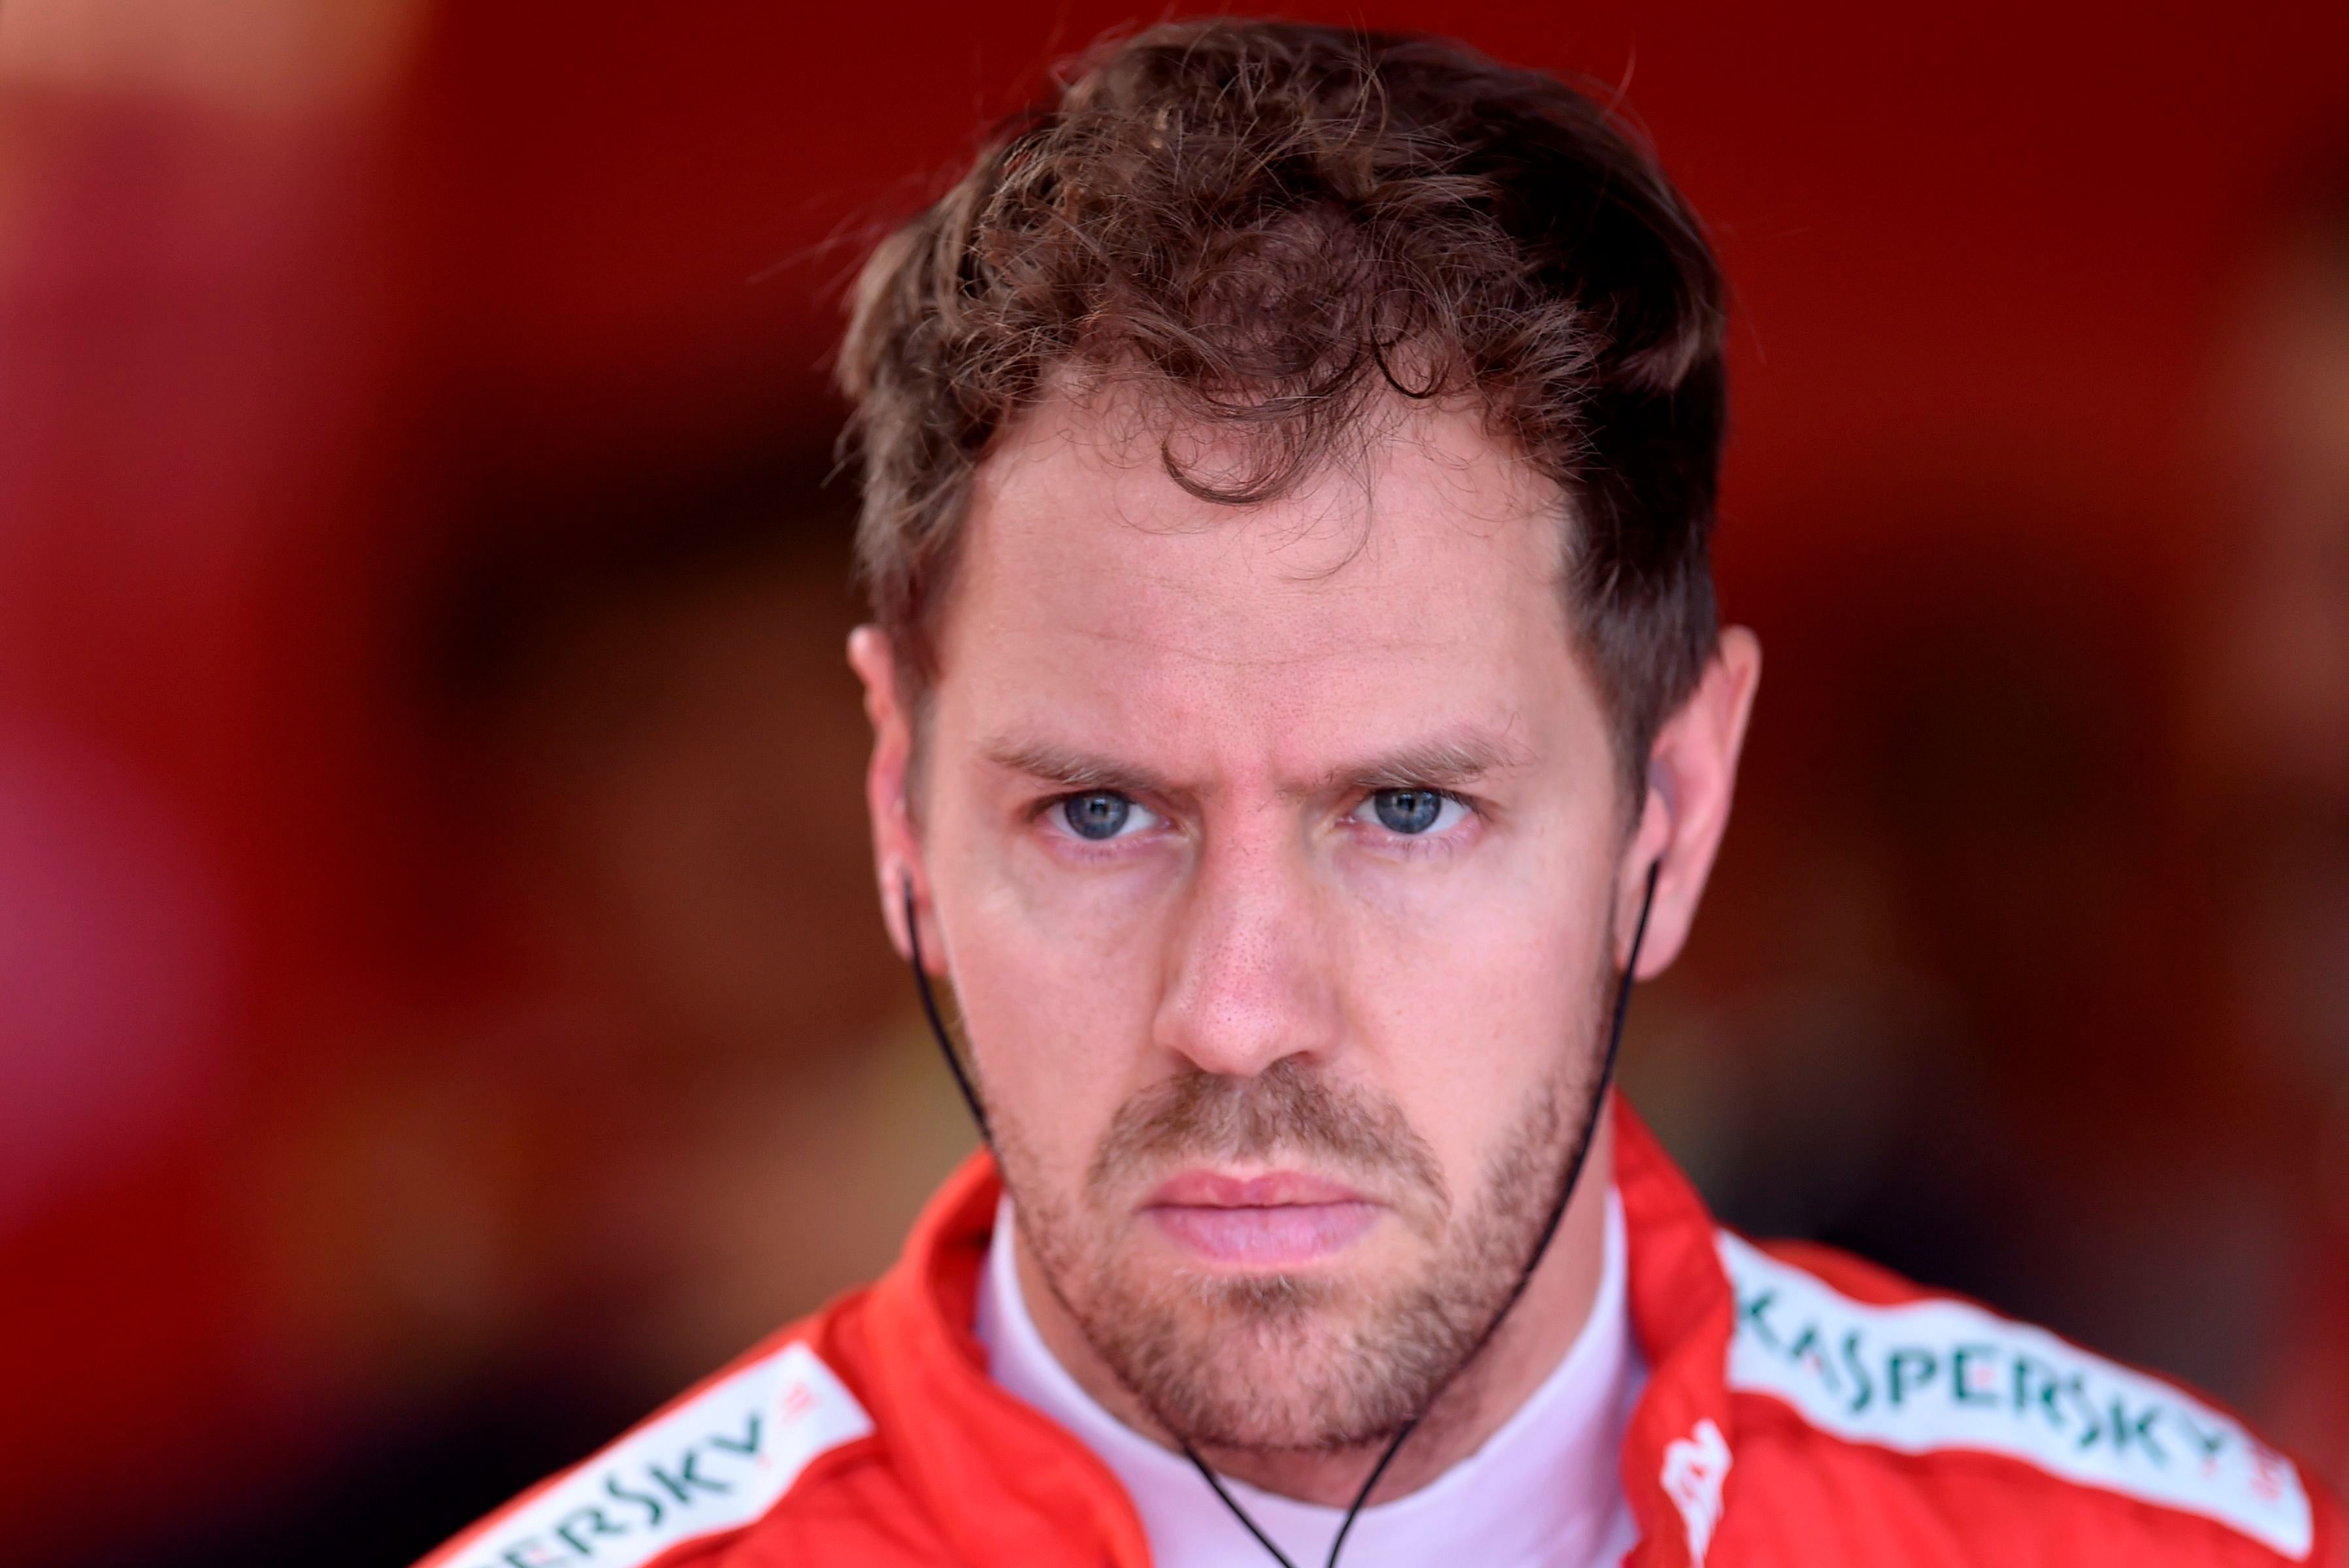 Though Vettel is available in the driver market, it is highly unlikely that reigning champions Mercedes will pair him up with Lewis Hamilton next year. (Credit: AFP Photo)